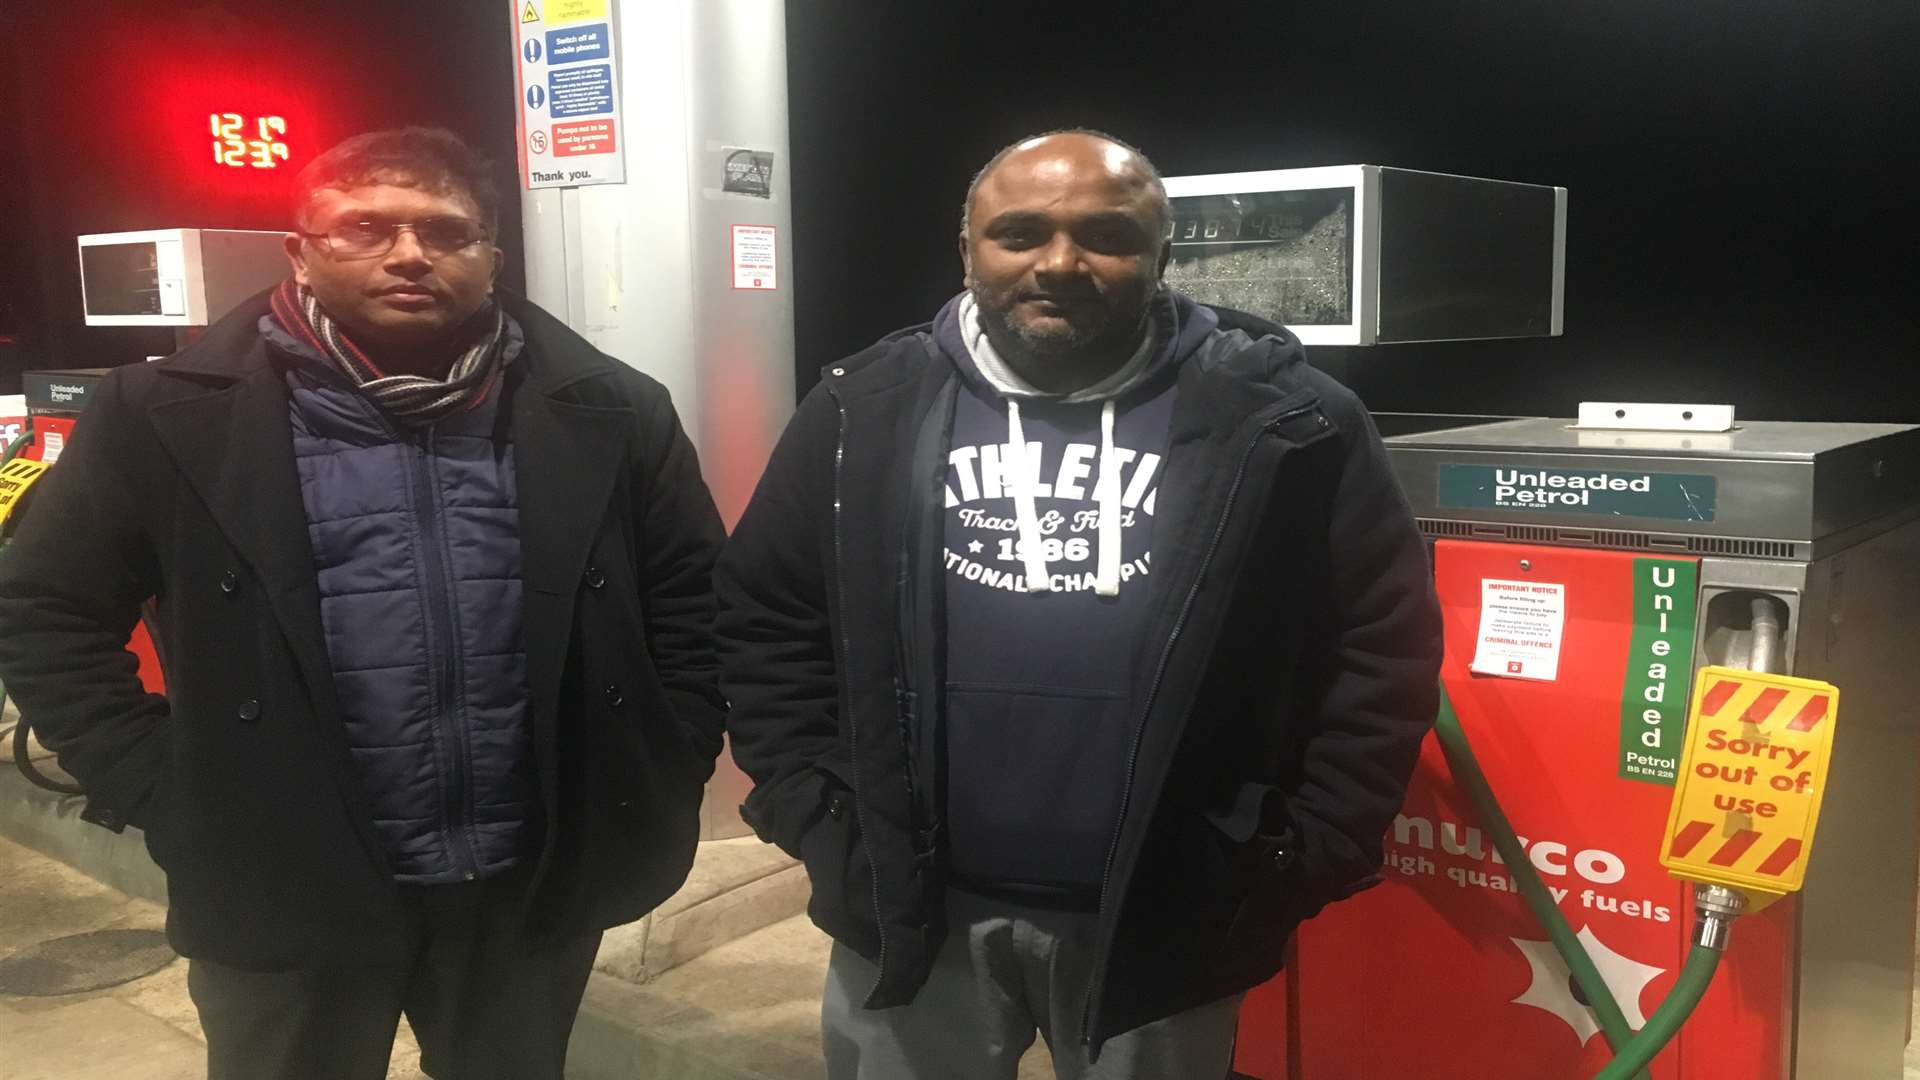 Murlay and Nirmalan Nadrajah, owners of the Murco petrol station in Sutton Valence